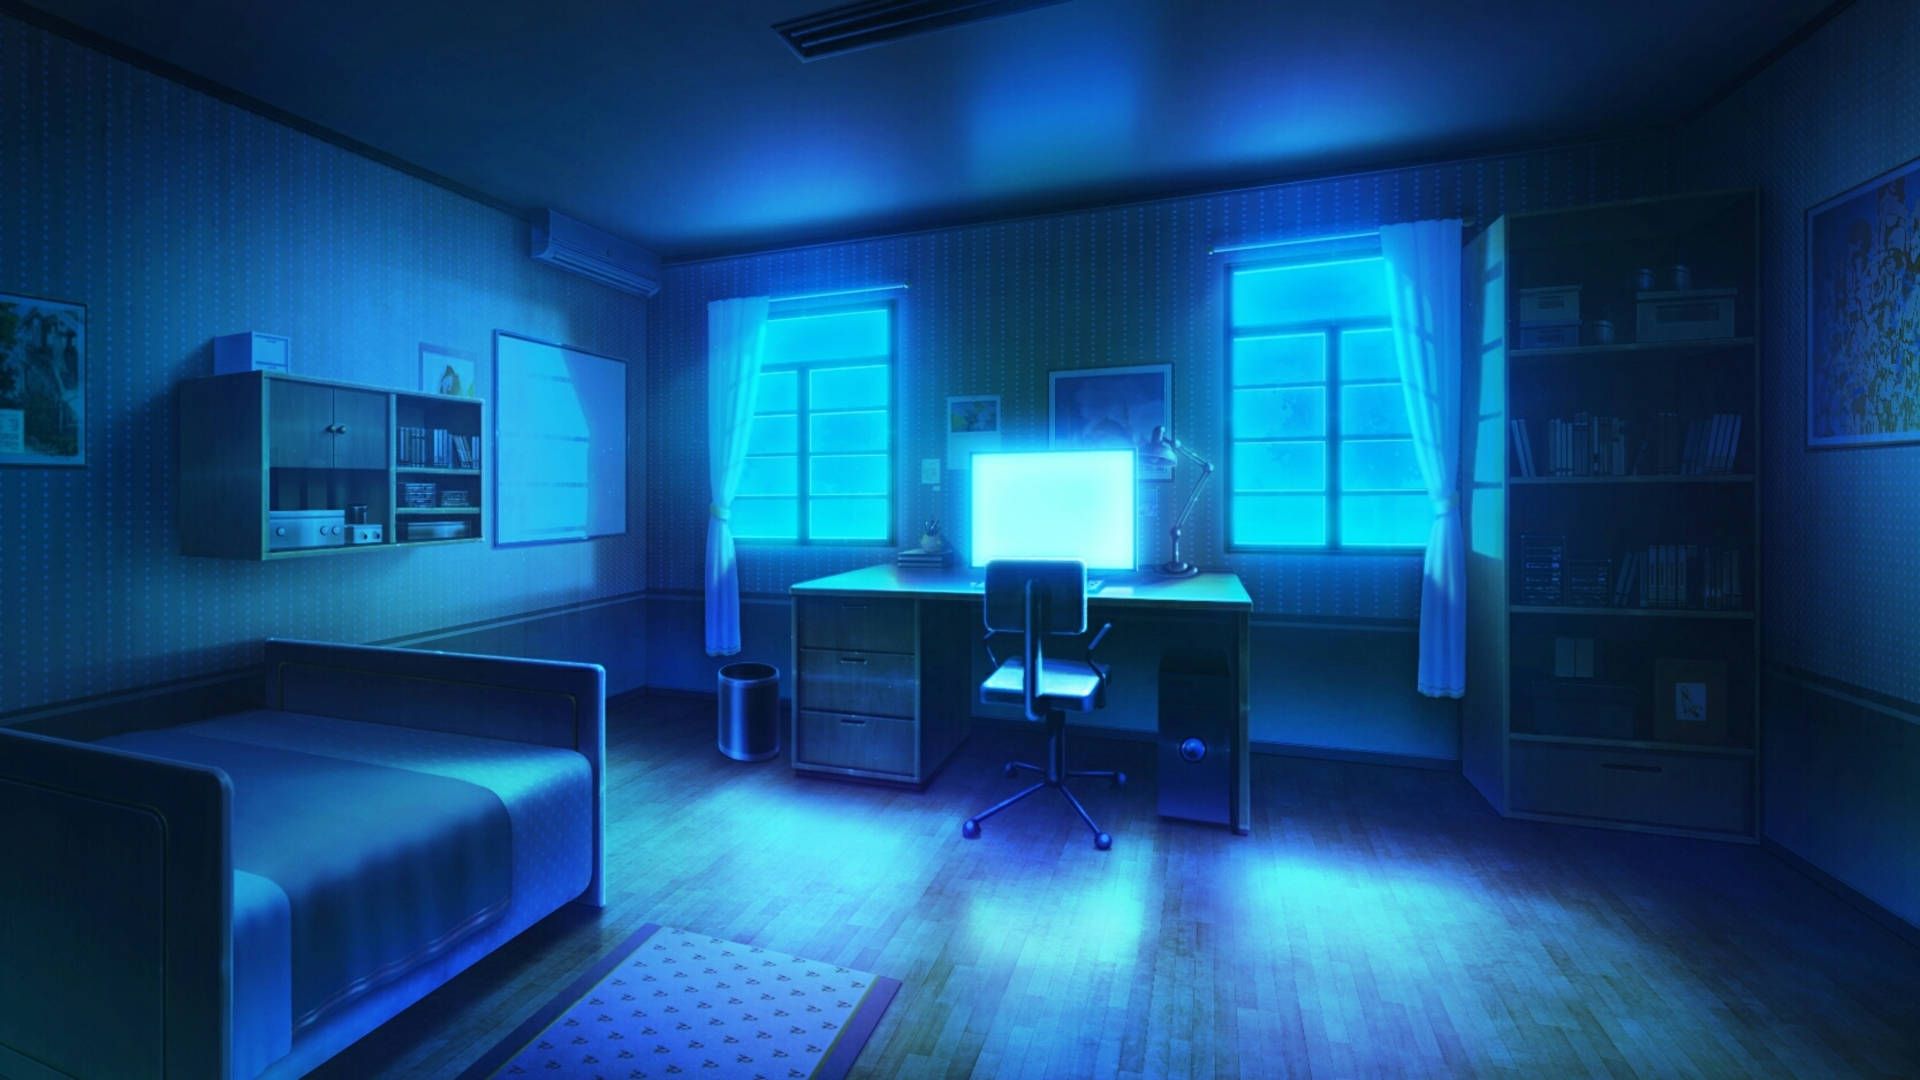 Top 999+ Anime Bedroom Wallpaper Full HD, 4K Free to Use